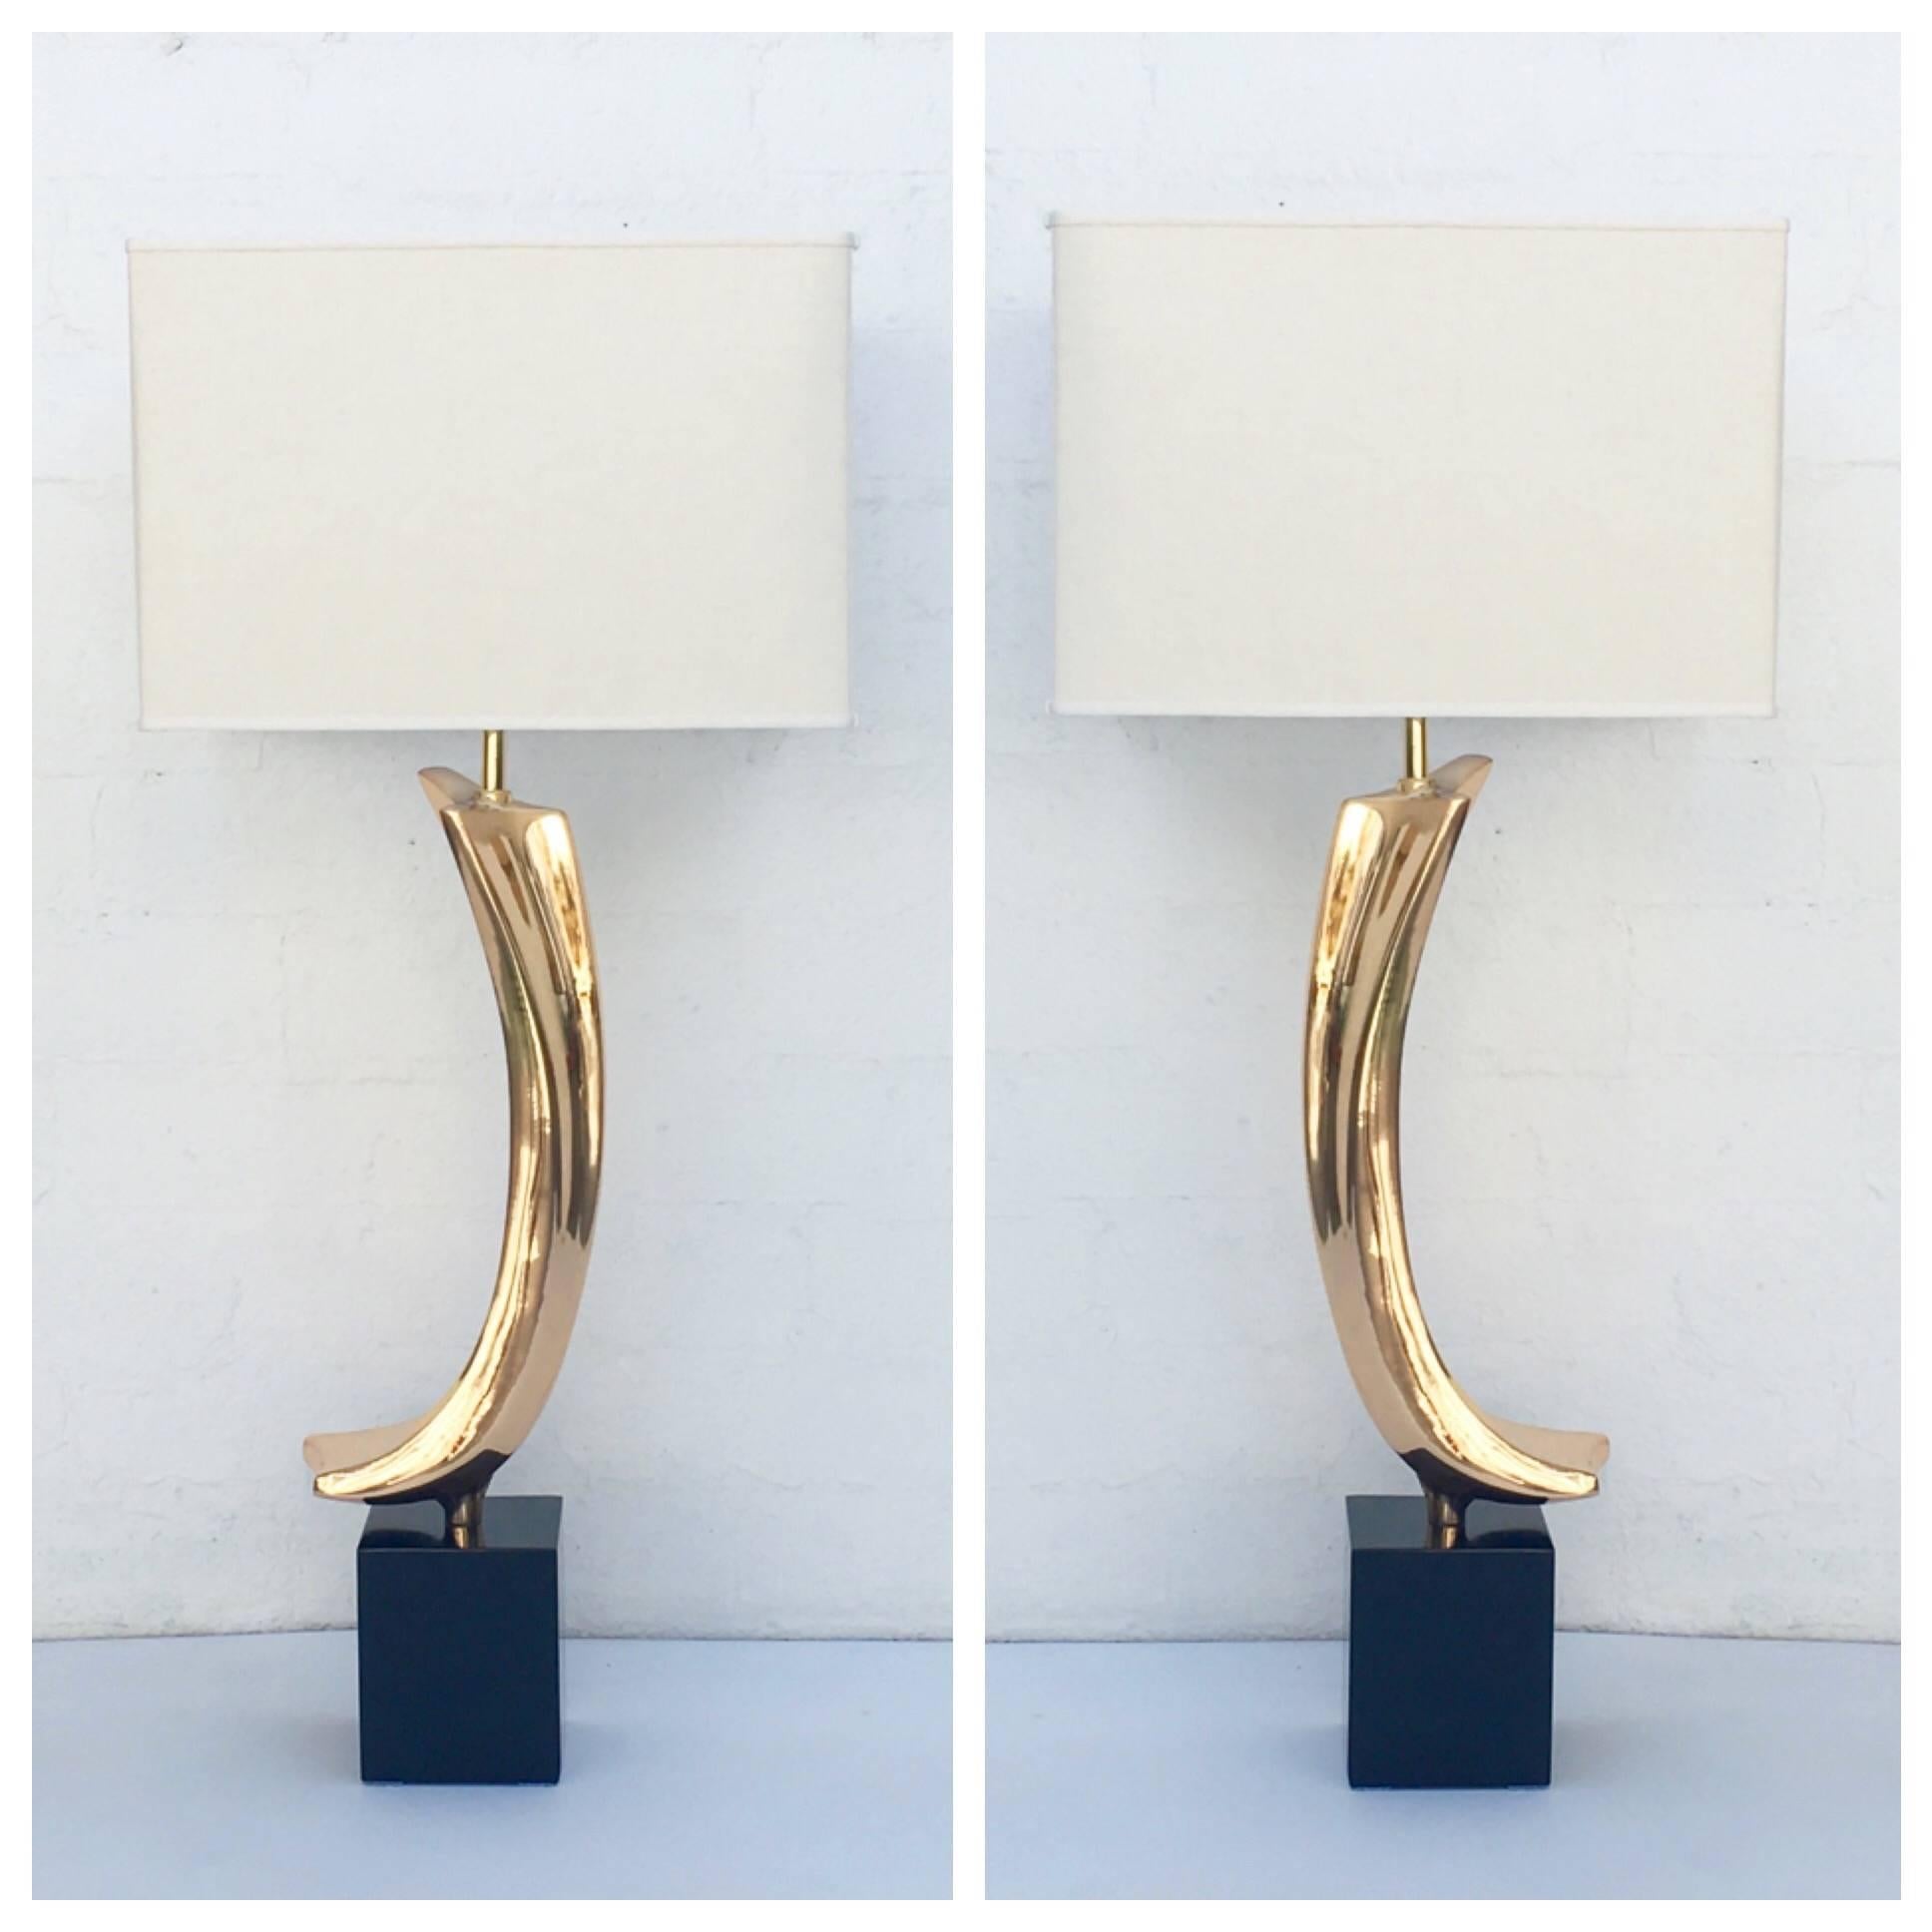 A very attractive pair of polished brass tables lamps. 
Newly re-plated in brass and newly powder-coated black bases. 
Newly re-wired with new brass hardware and new rayon braided cord. 
The new shades are vanilla colored linen. 
Designed by